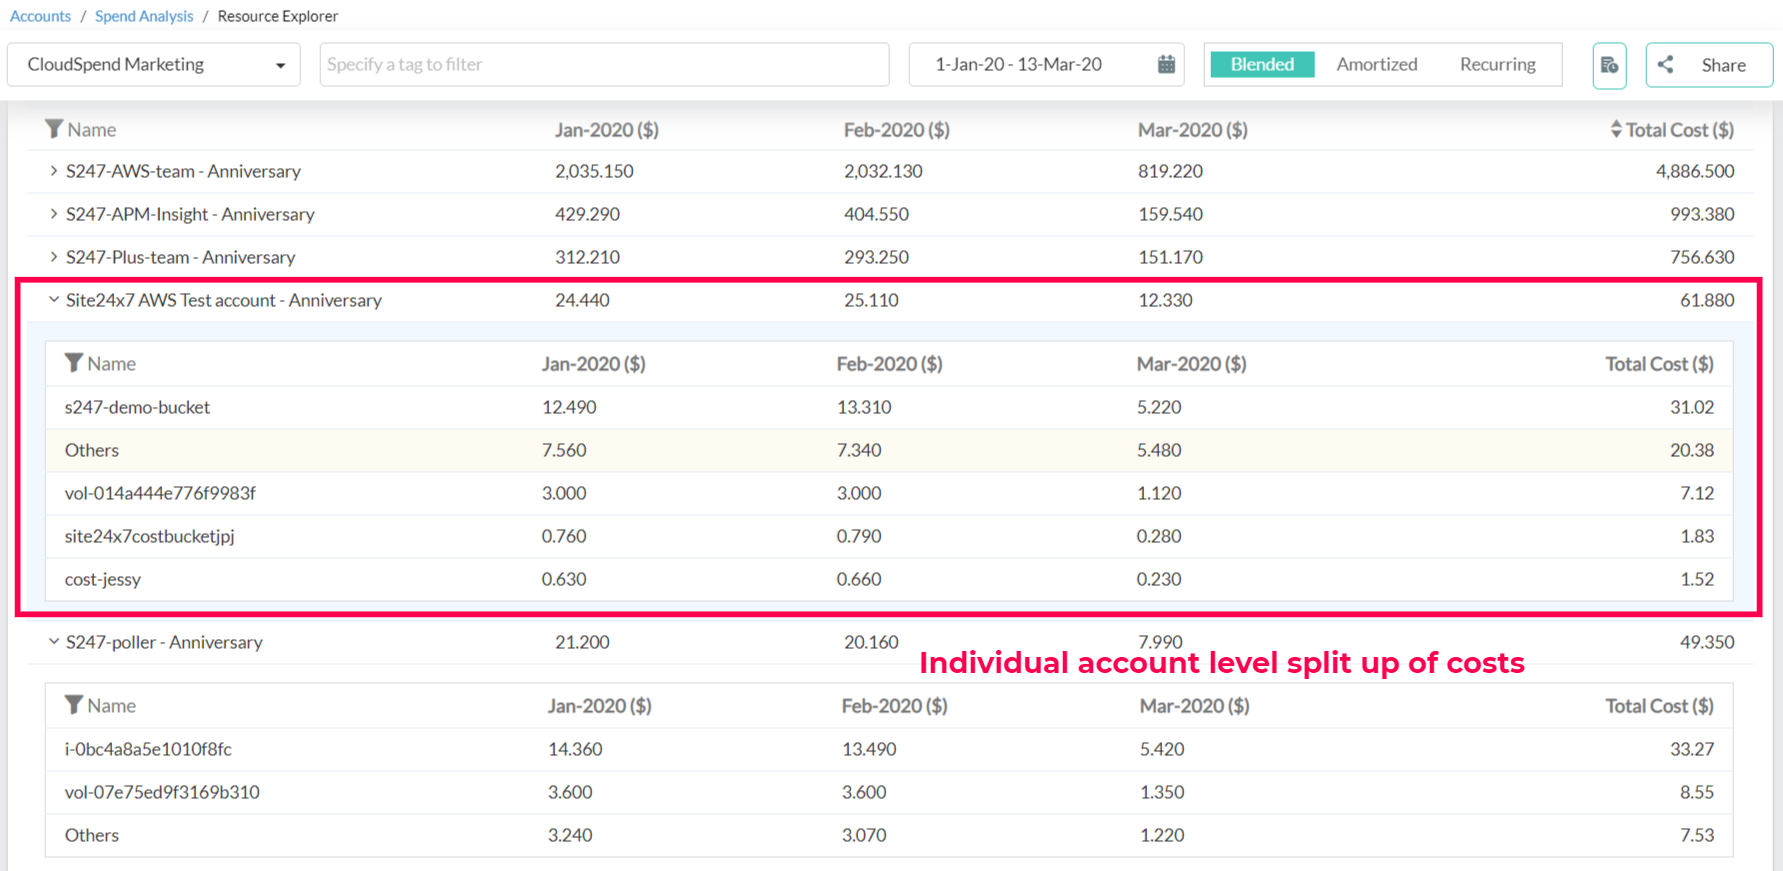 Account splitup view of cloud cost based on service